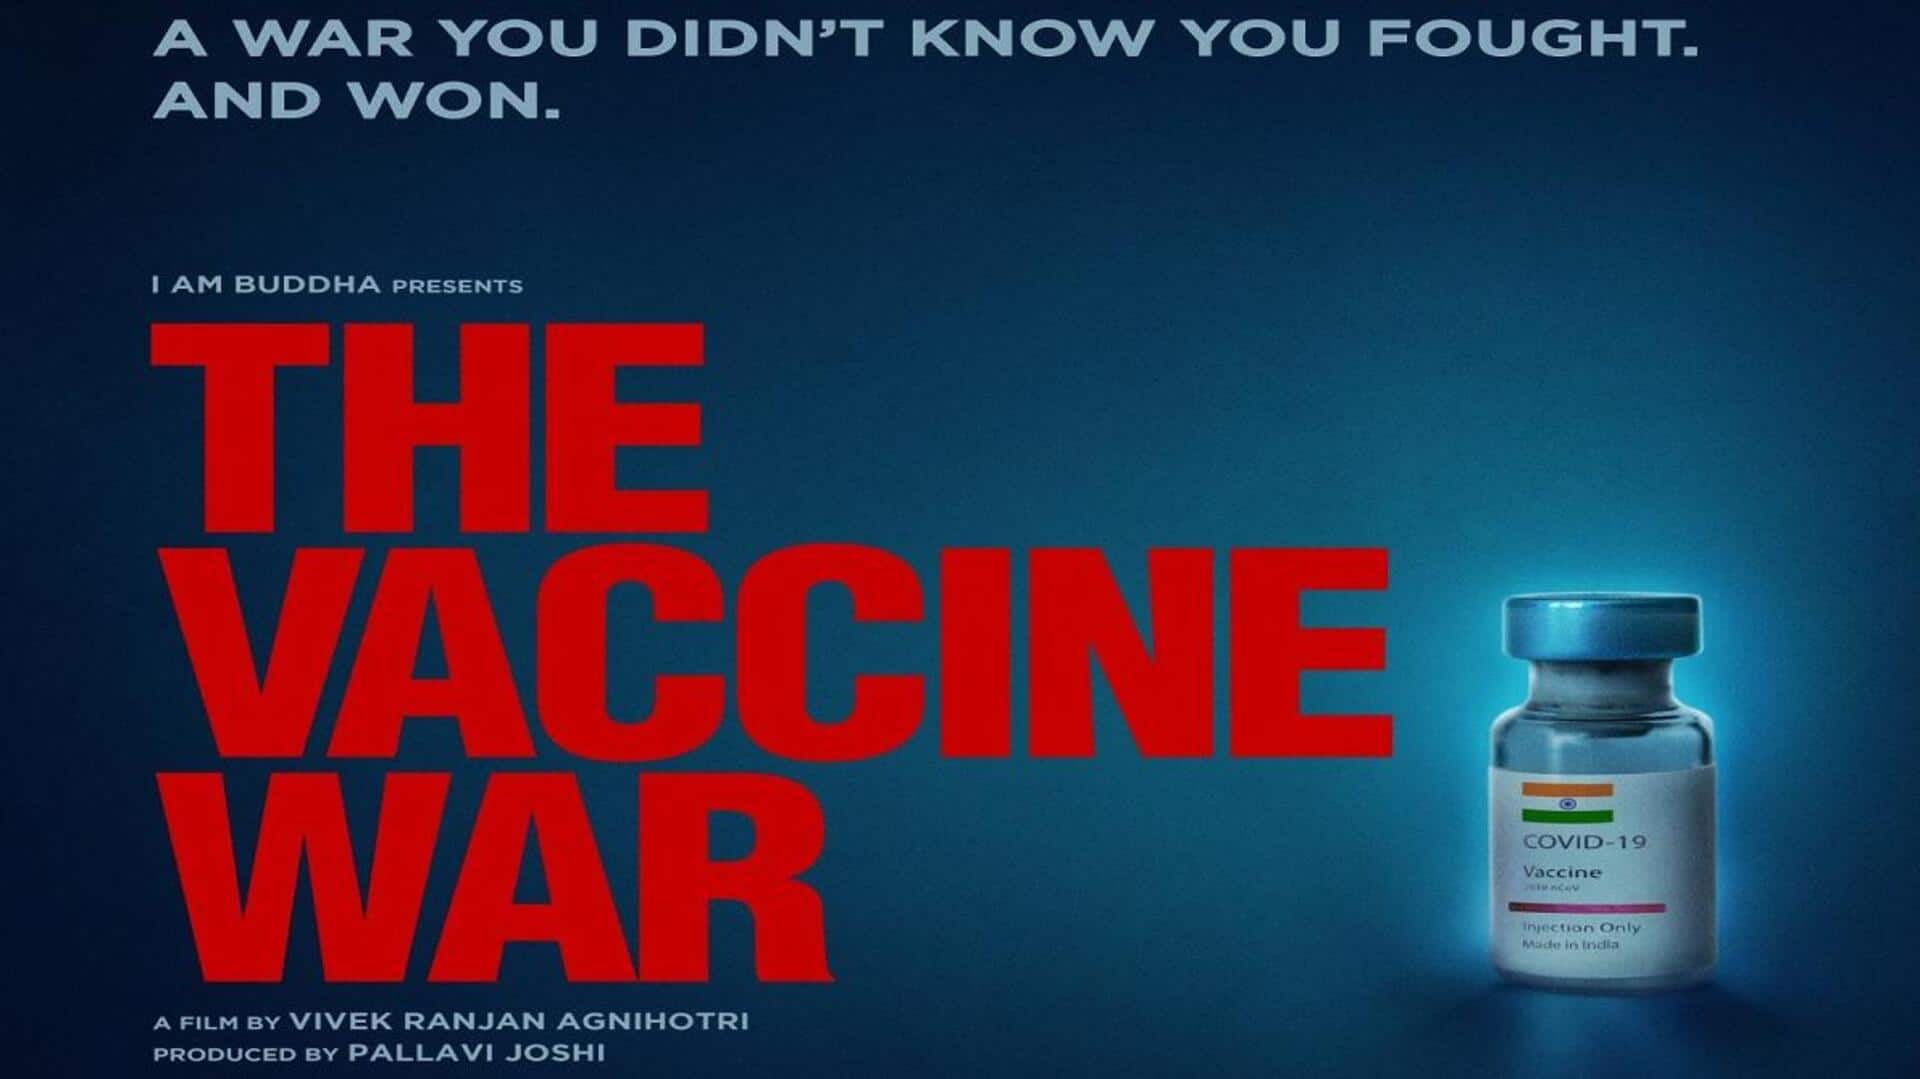 Box office: 'The Vaccine War' sees slight jump in collections